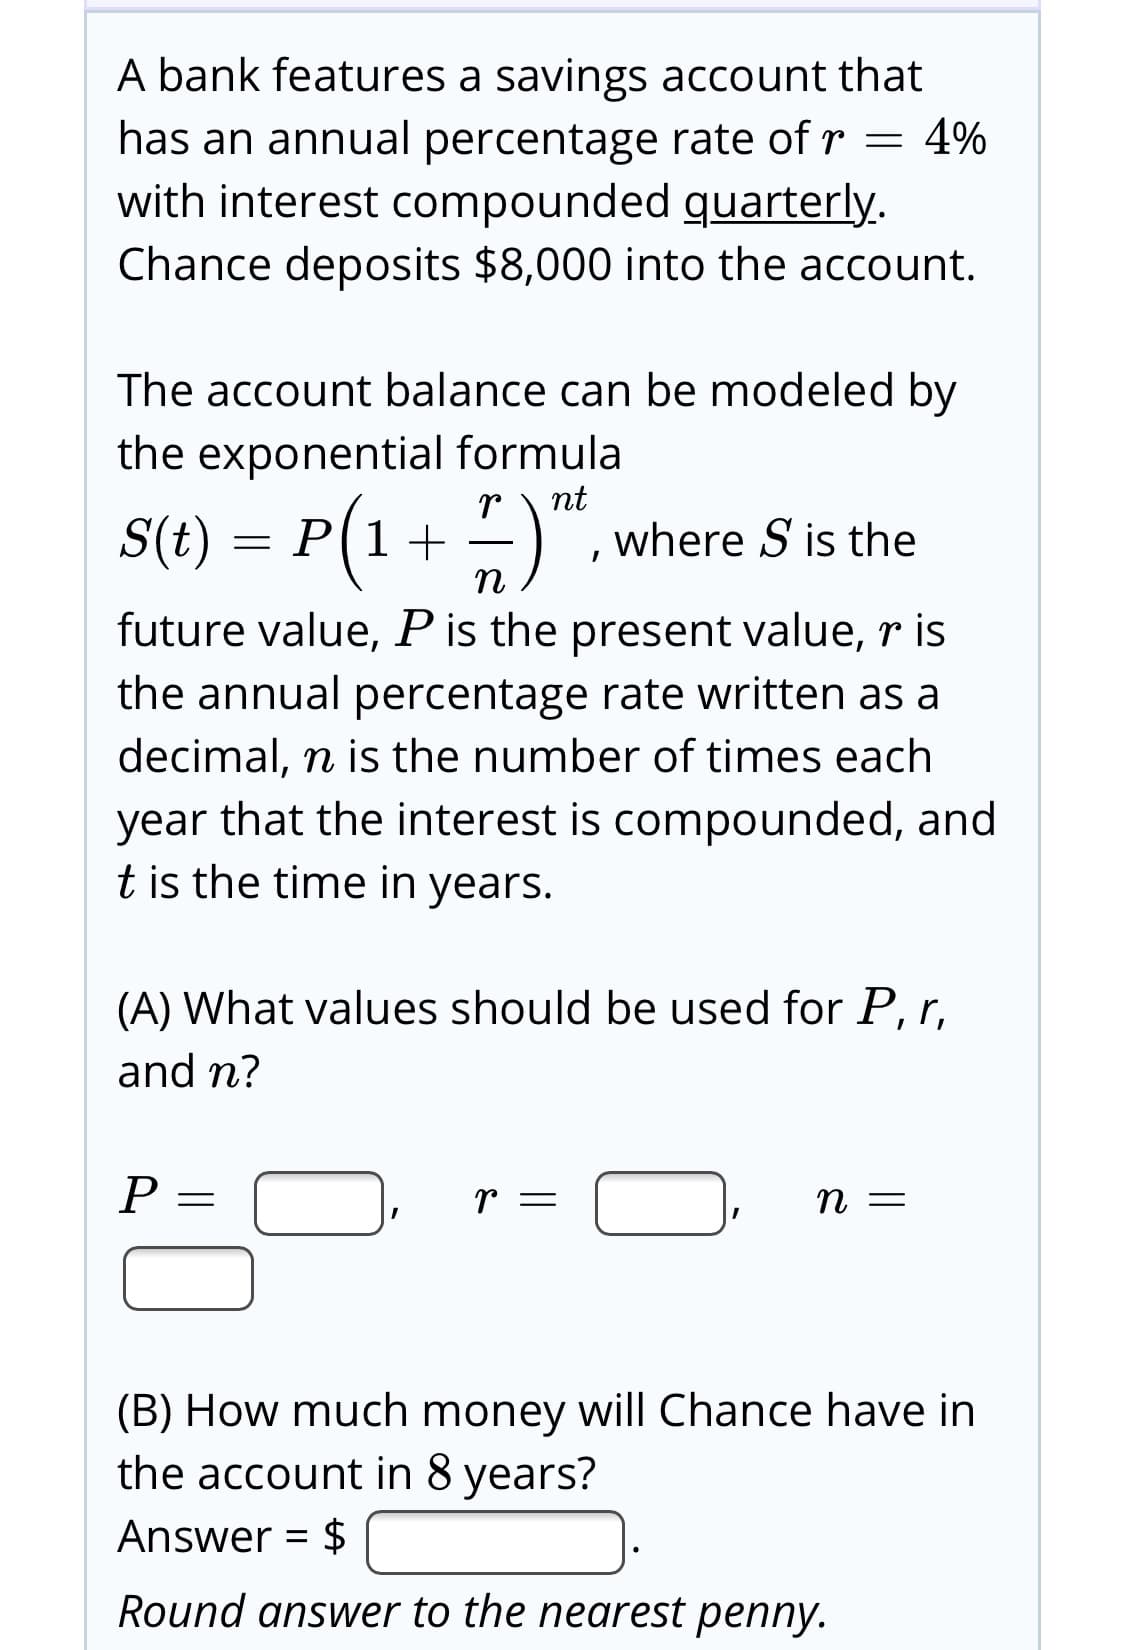 A bank features a savings account that
has an annual percentage rate of r = 4%
with interest compounded quarterly.
Chance deposits $8,000 into the account.
The account balance can be modeled by
the exponential formula
nt
S(t) = P(1+
where S is the
п
future value, Pis the present value, r is
the annual percentage rate written as a
decimal, n is the number of times each
year that the interest is compounded, and
t is the time in years.
(A) What values should be used for P, r,
and n?
(B) How much money will Chance have in
the account in 8 years?
Answer = $
%3D
Round answer to the nearest penny.
